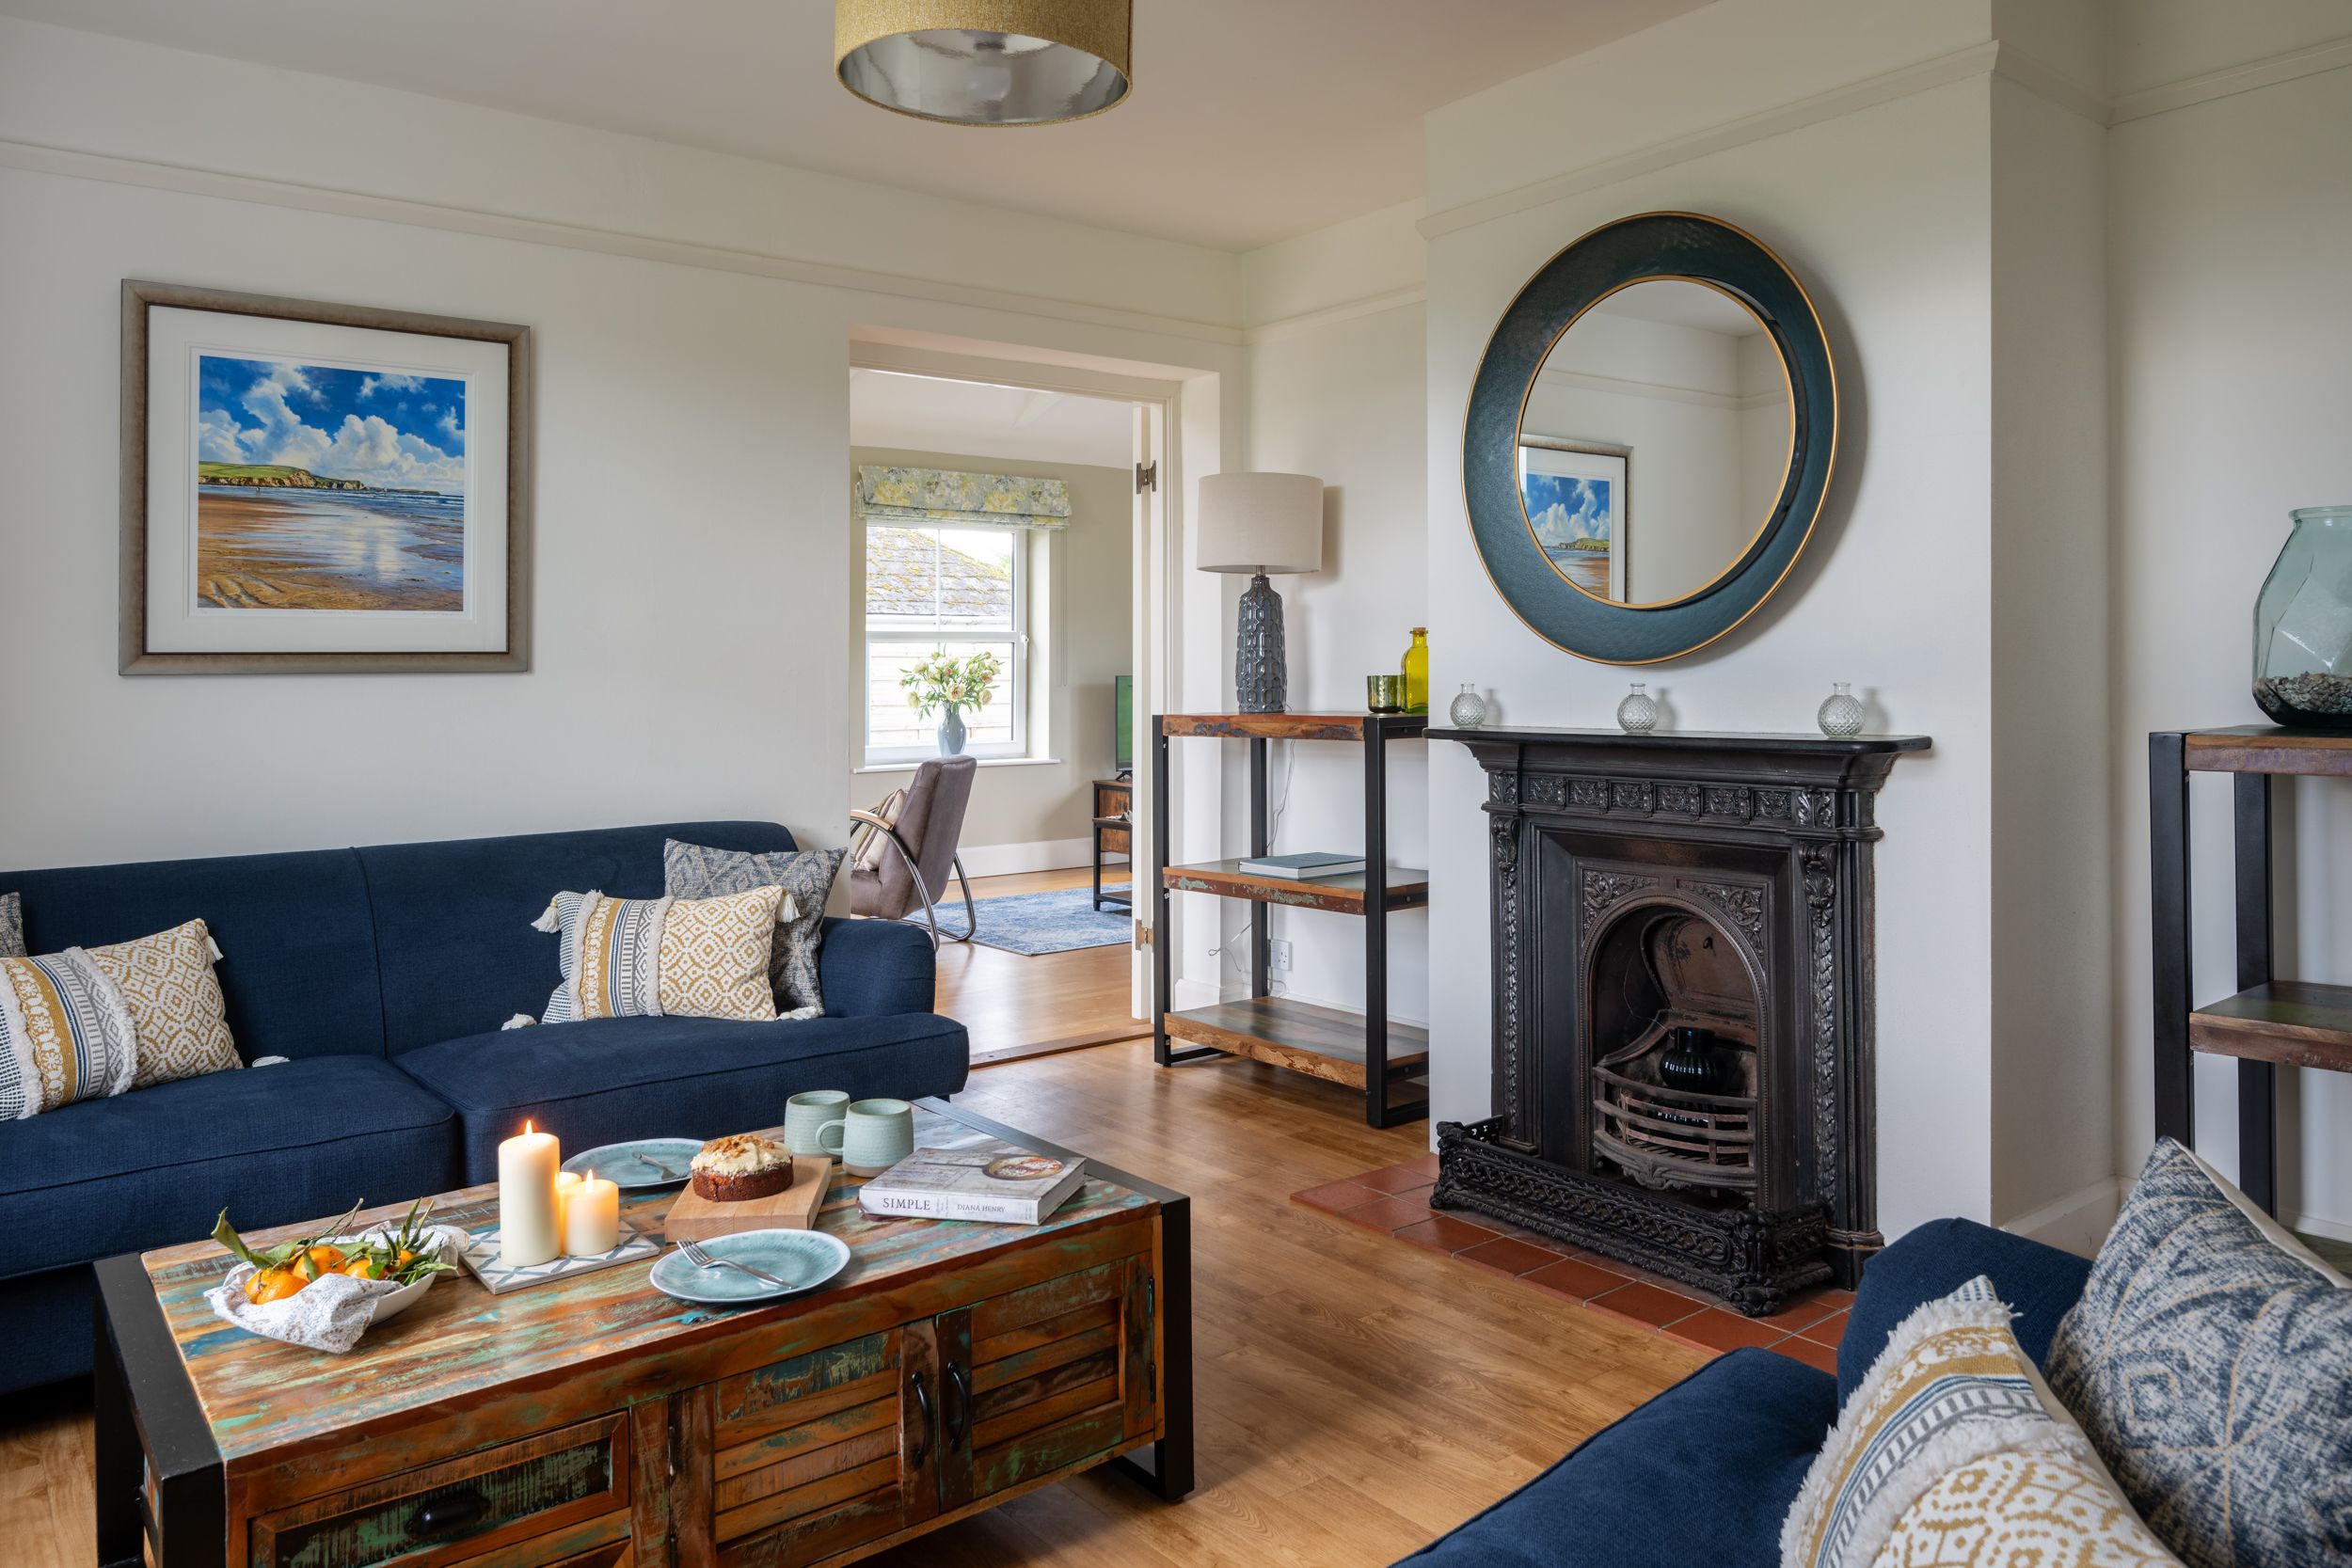 Holiday homes in Thurlestone